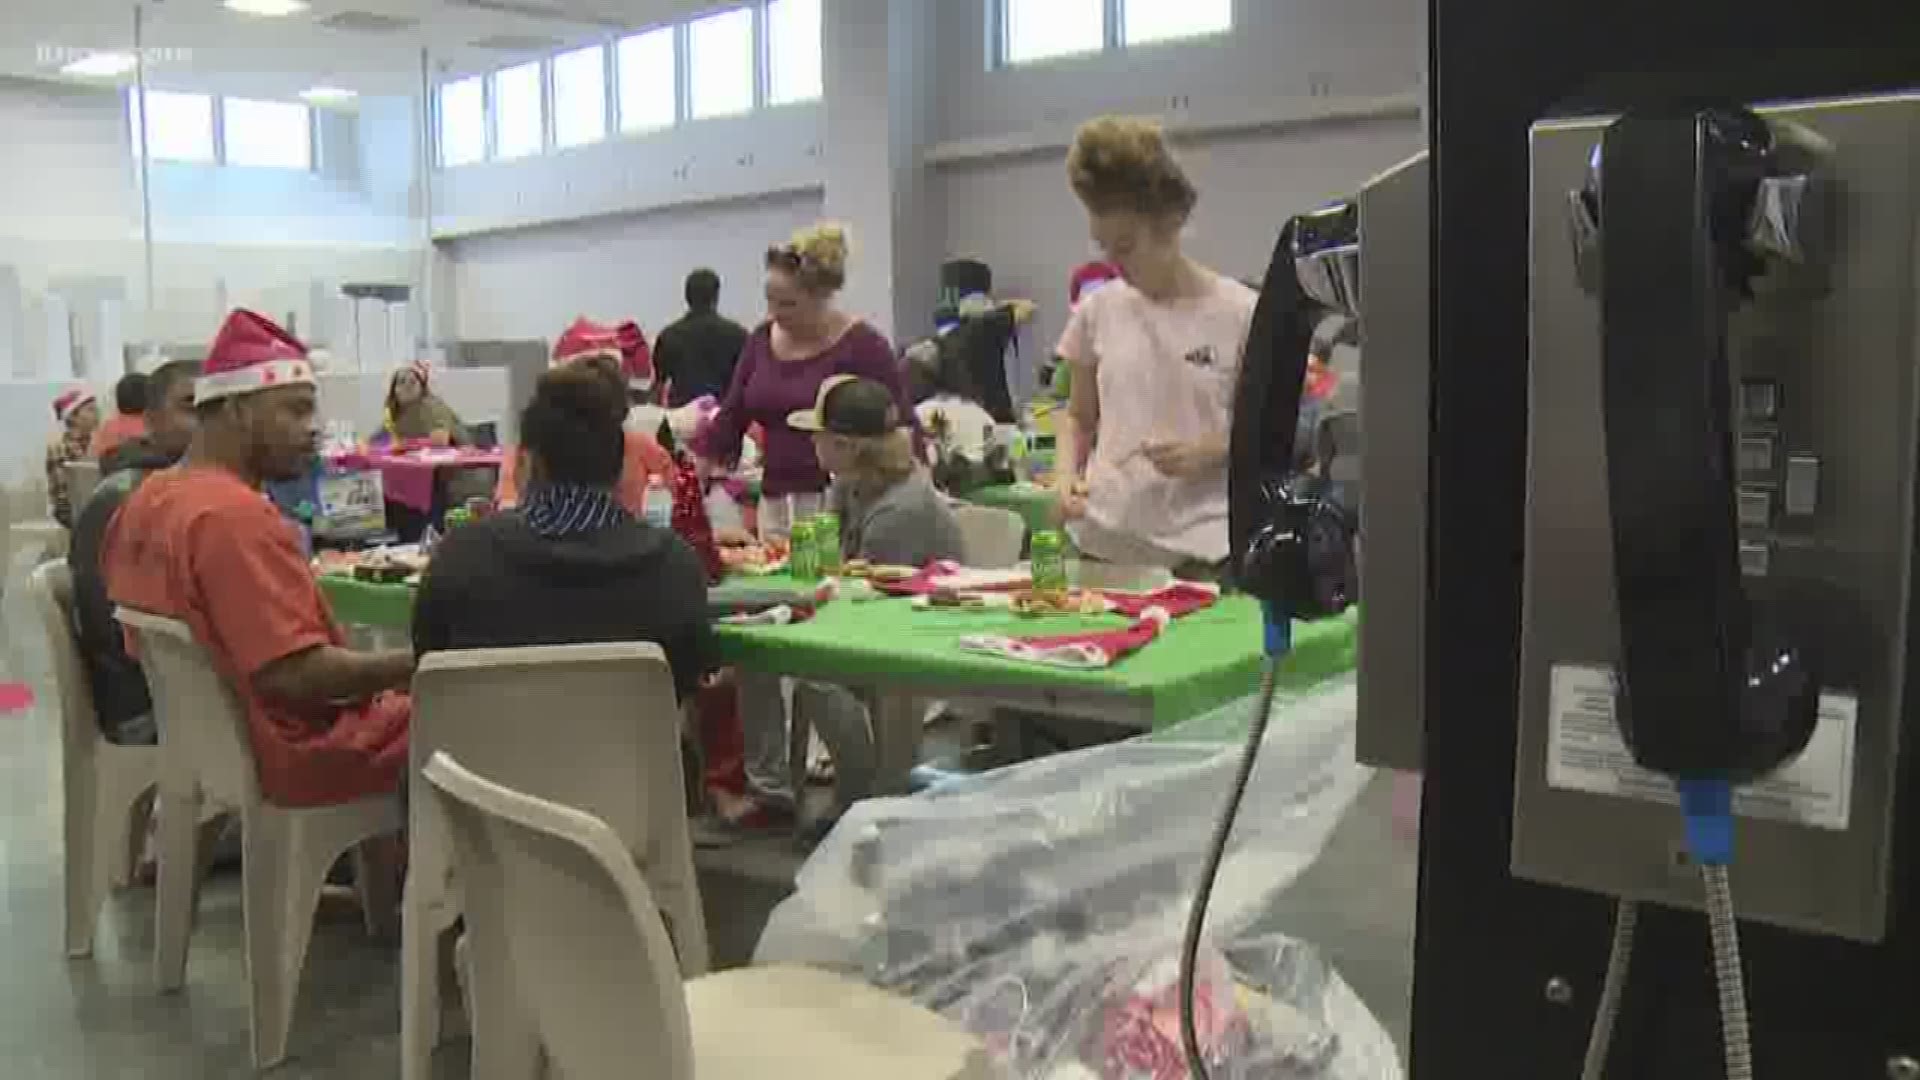 Some Harris County inmates celebrated Christmas Friday with their children, many of whom had not seen them in more than a year.